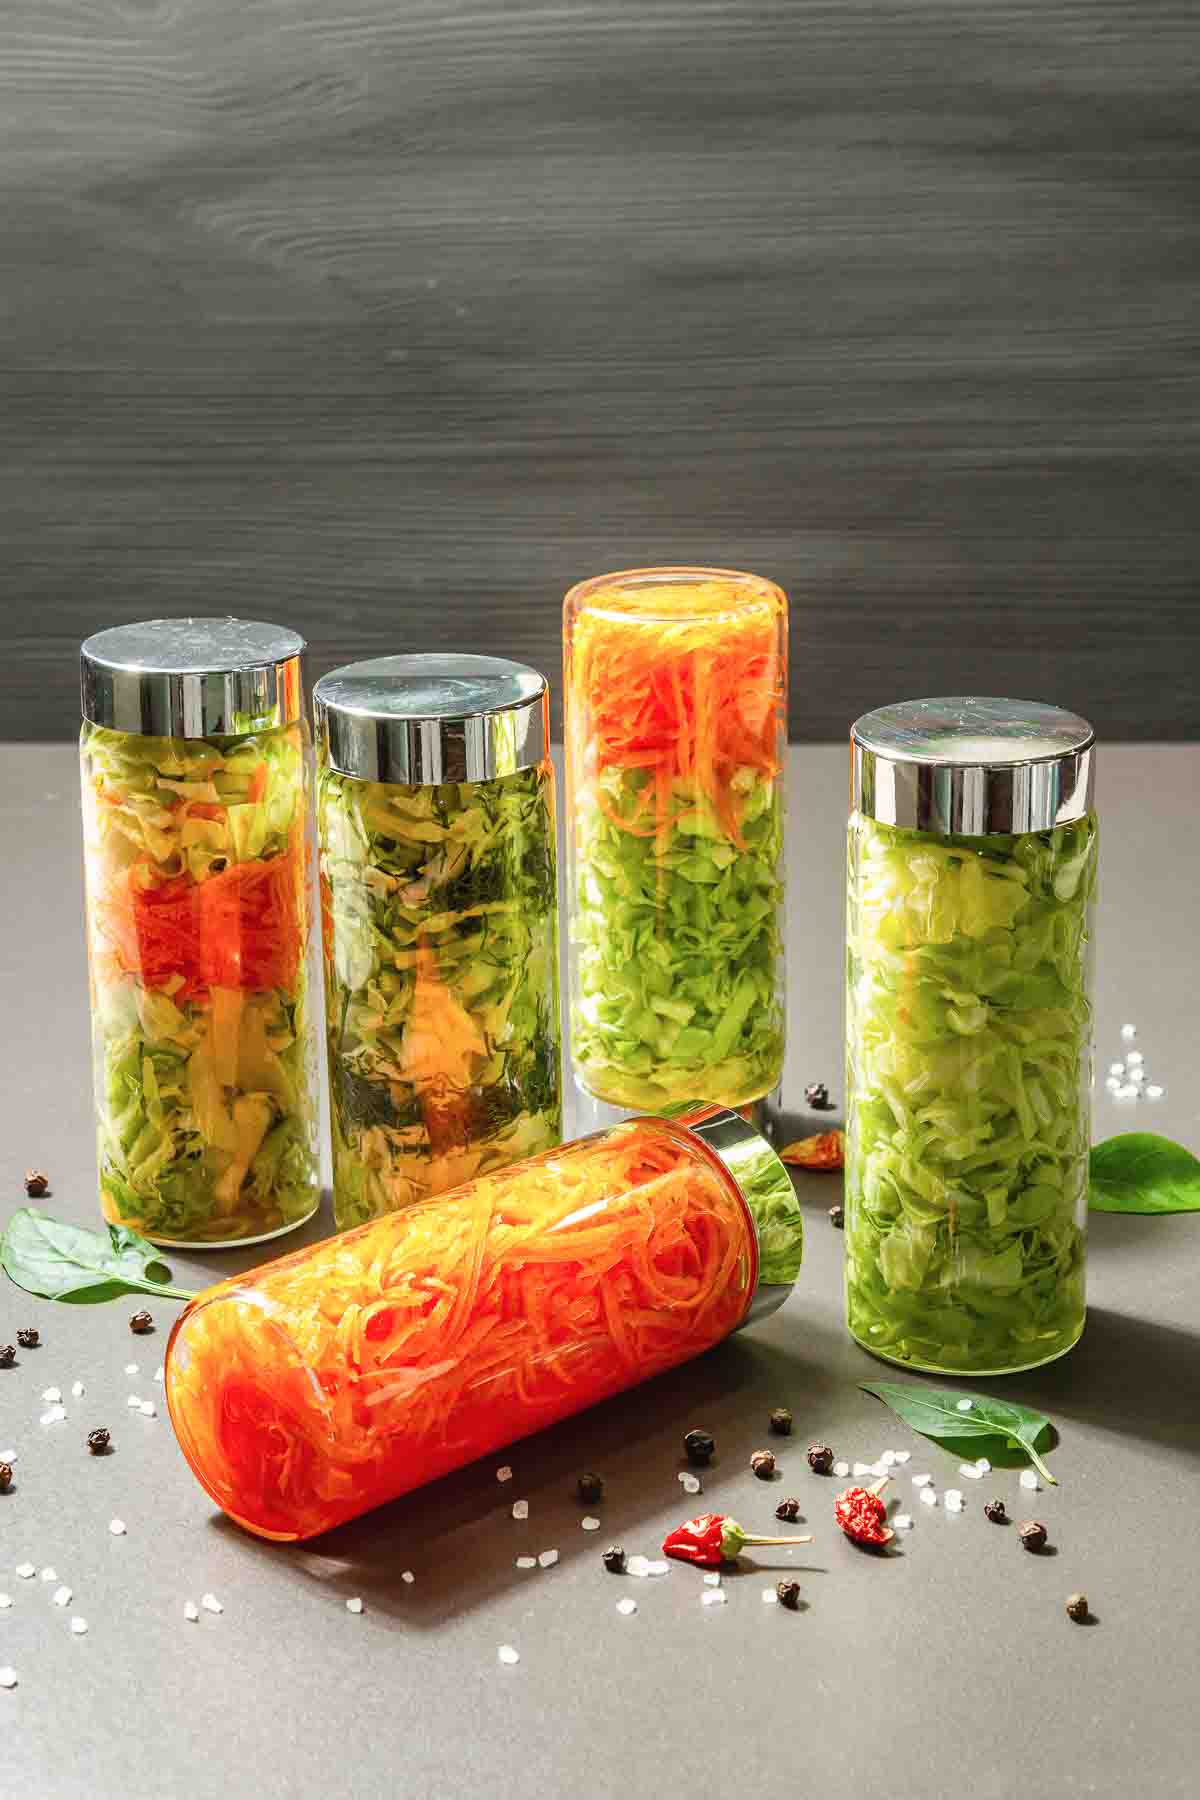 Delicious jar salad with cabbage, carrot, dill, and spices.